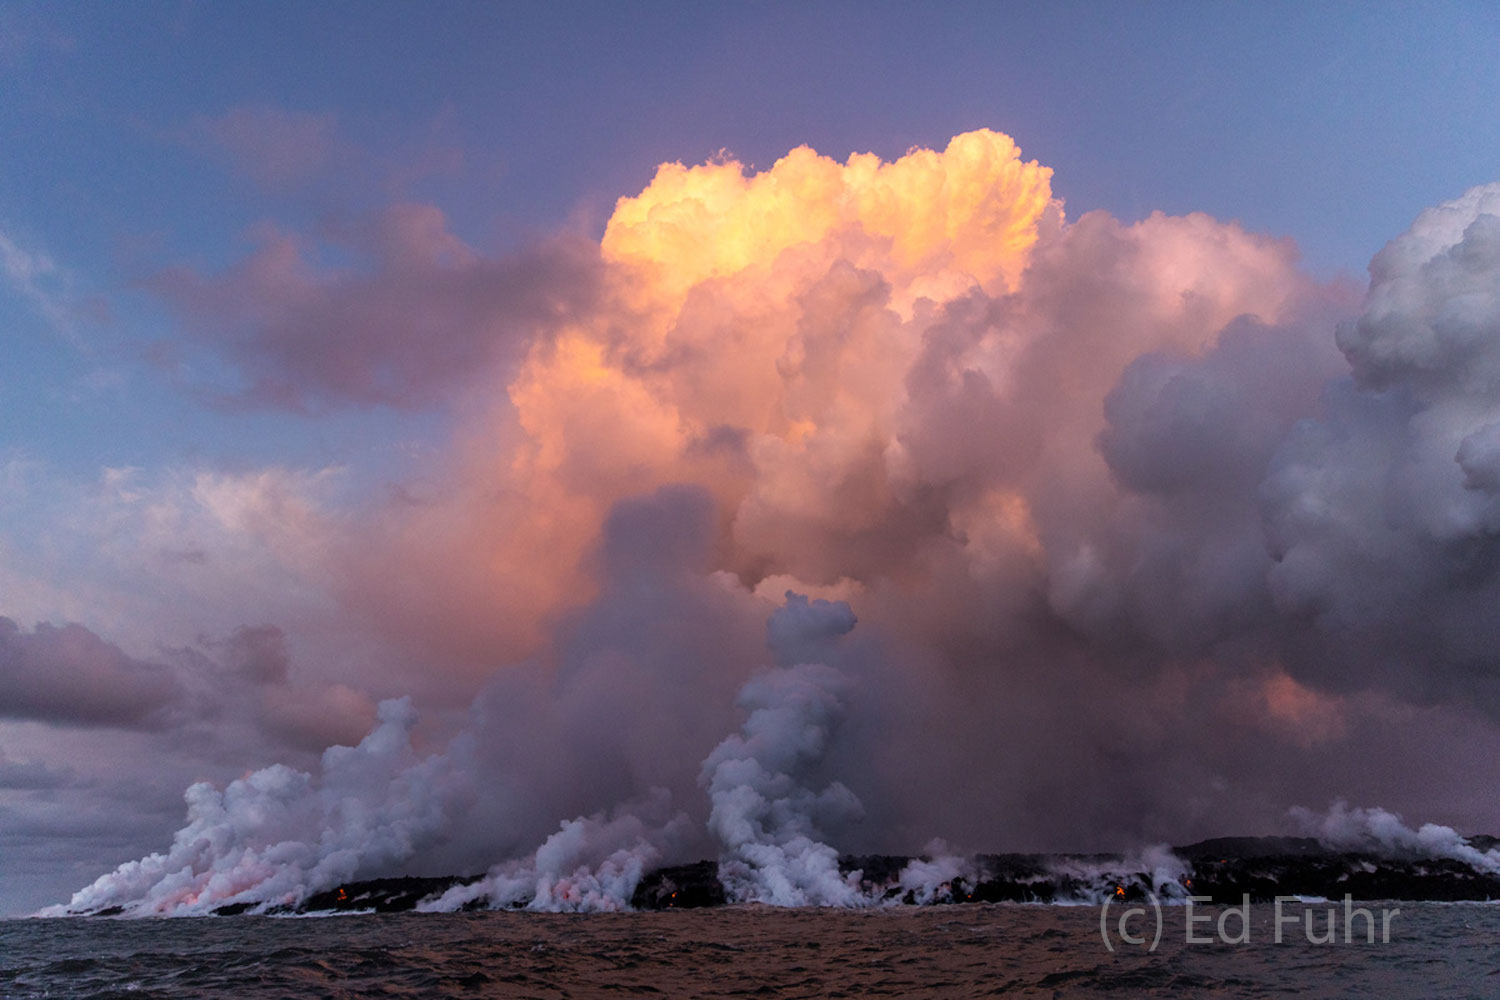 A giant plume of steam rises above one of the points of entry into the sea.